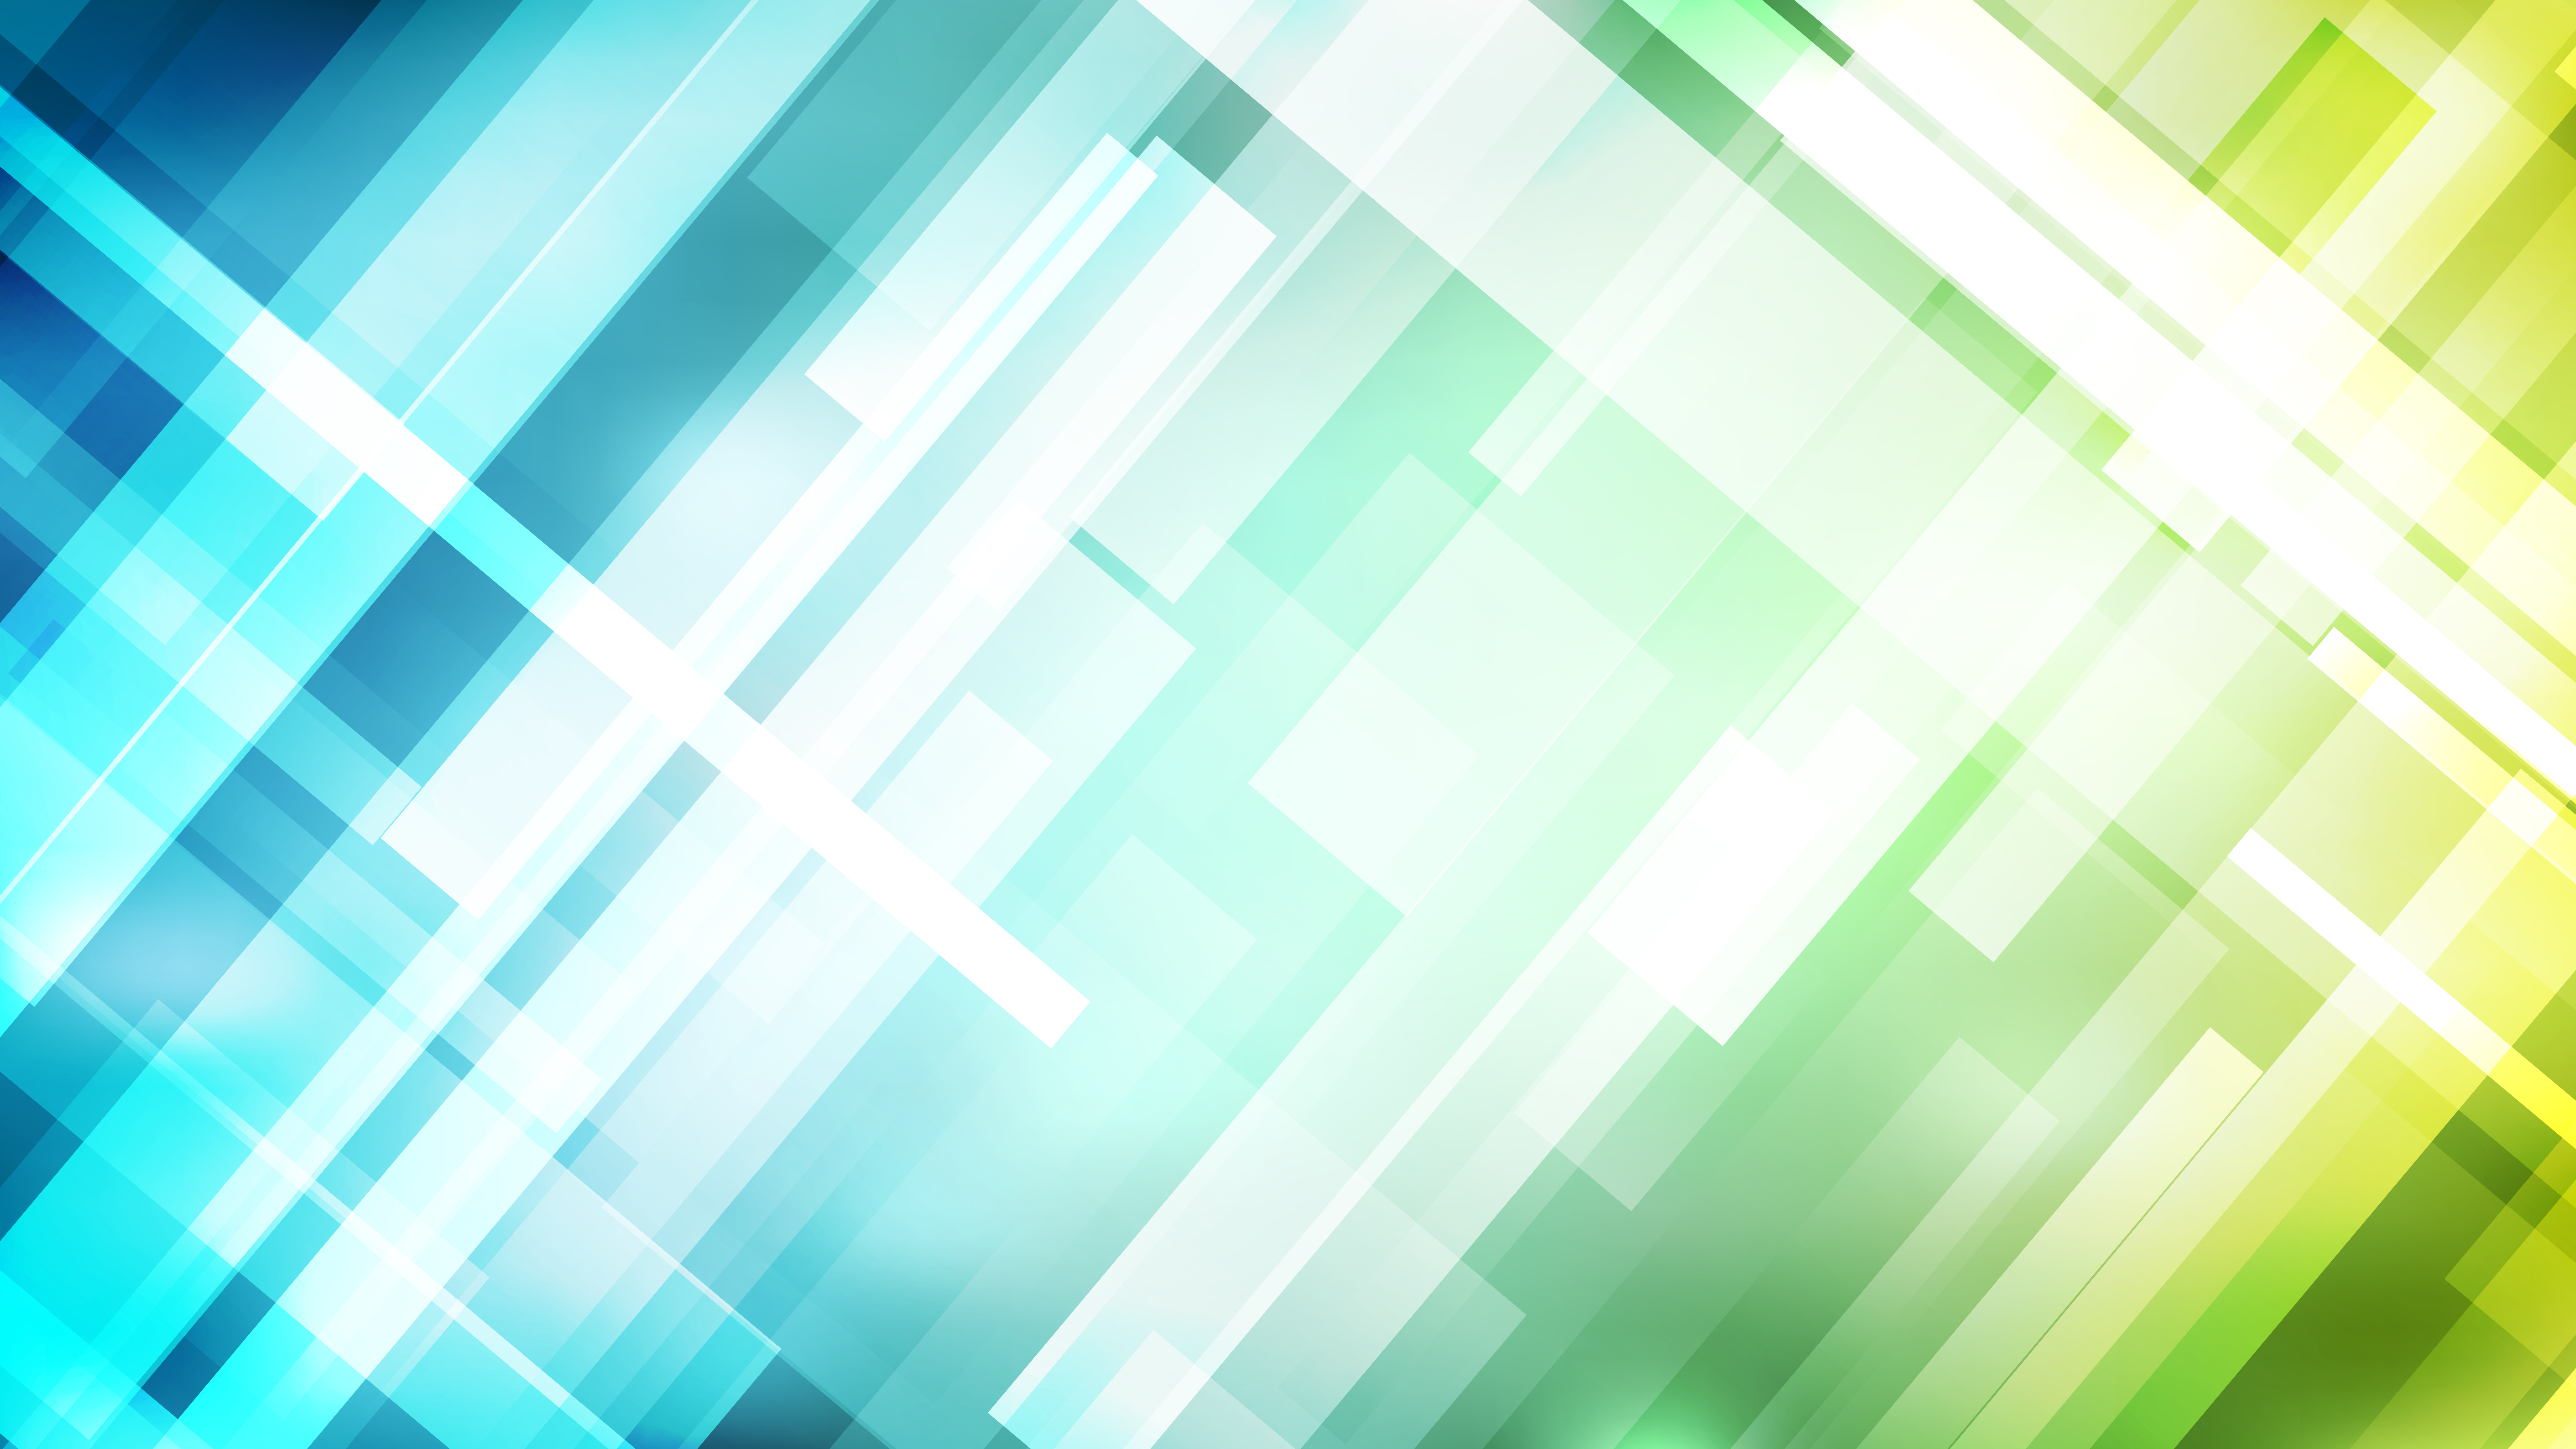 Free Geometric Abstract Blue Green and White Background Graphic